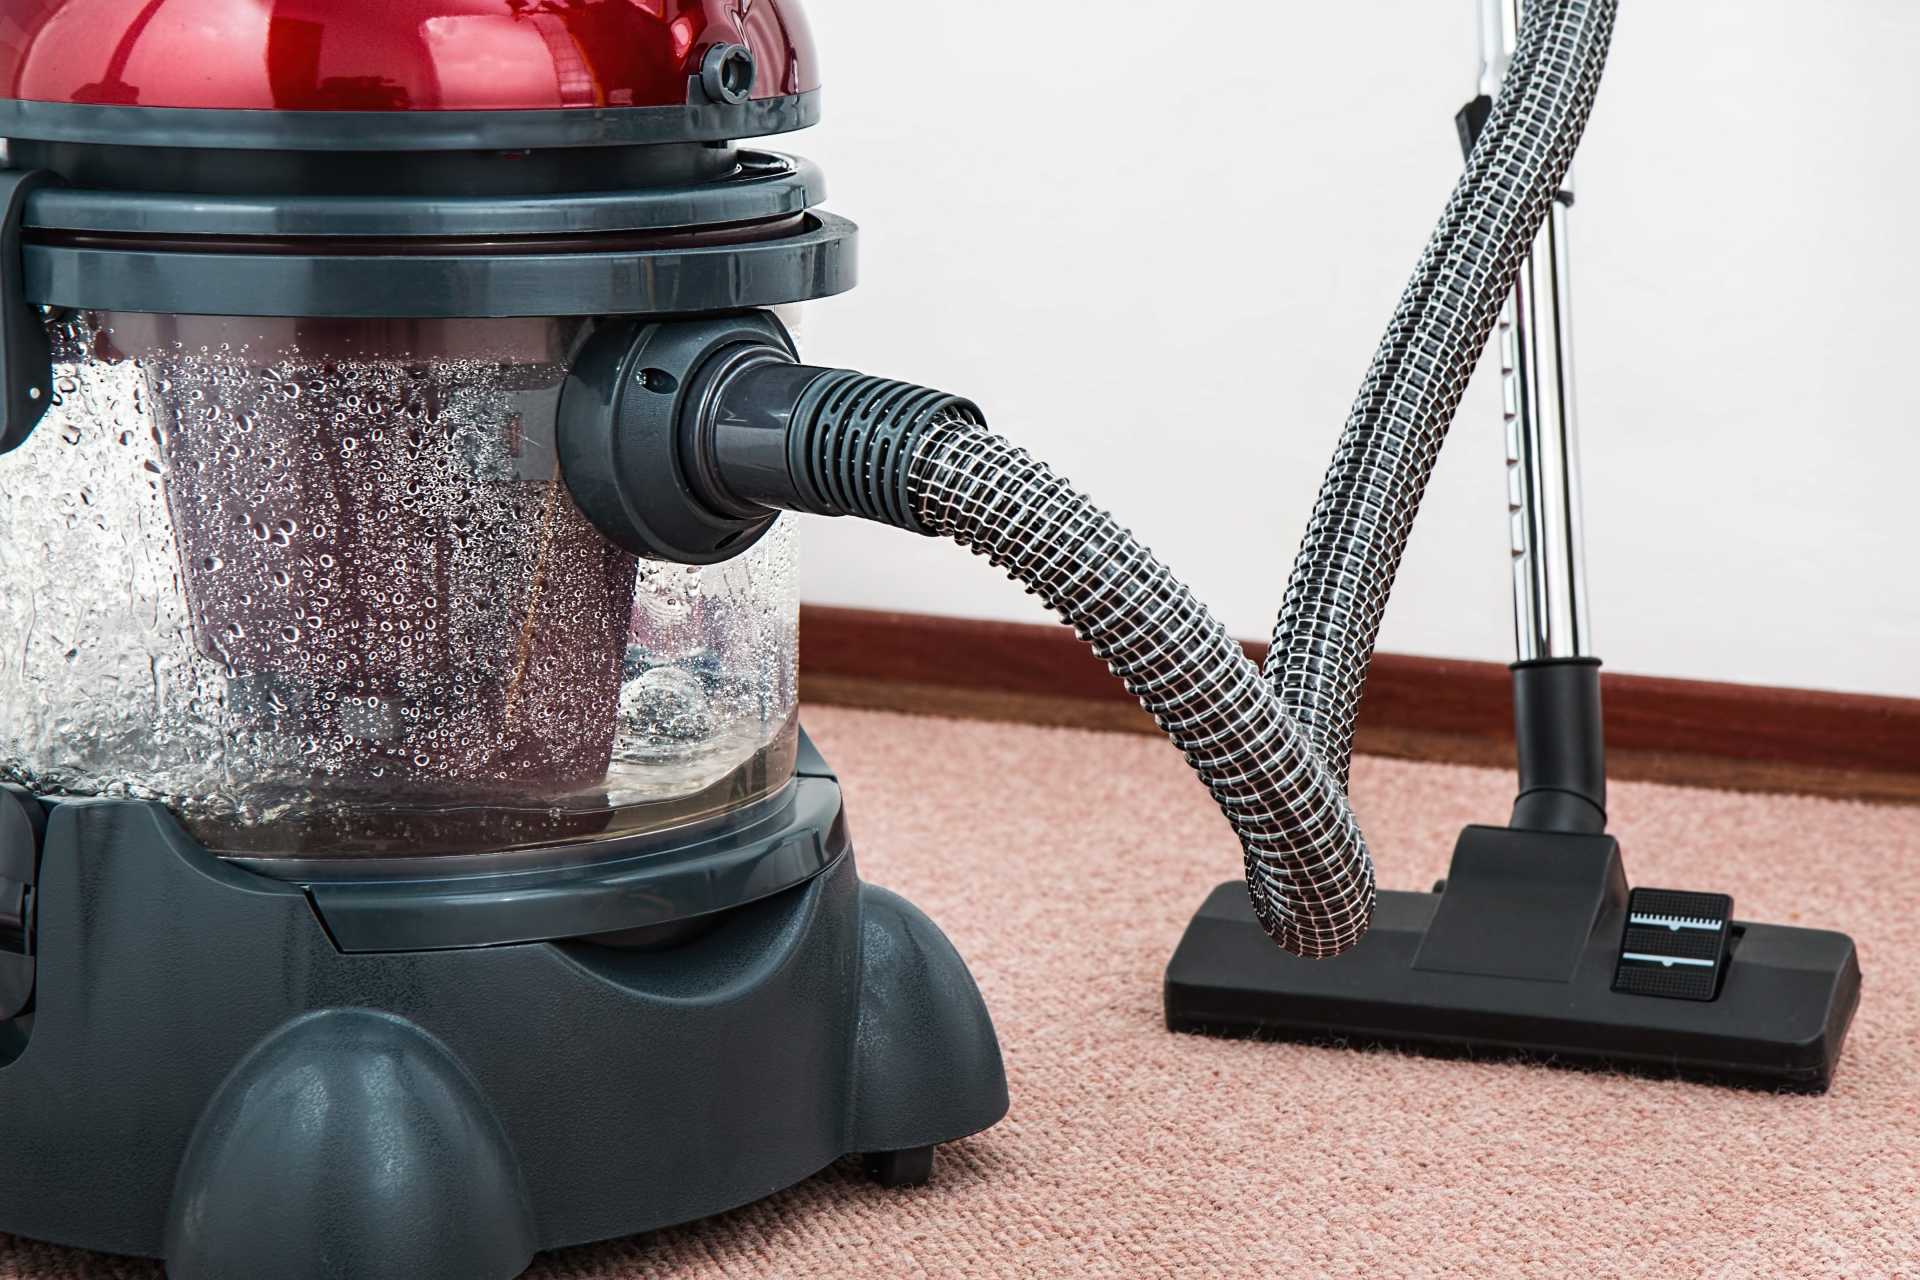 Hoover and Carpet